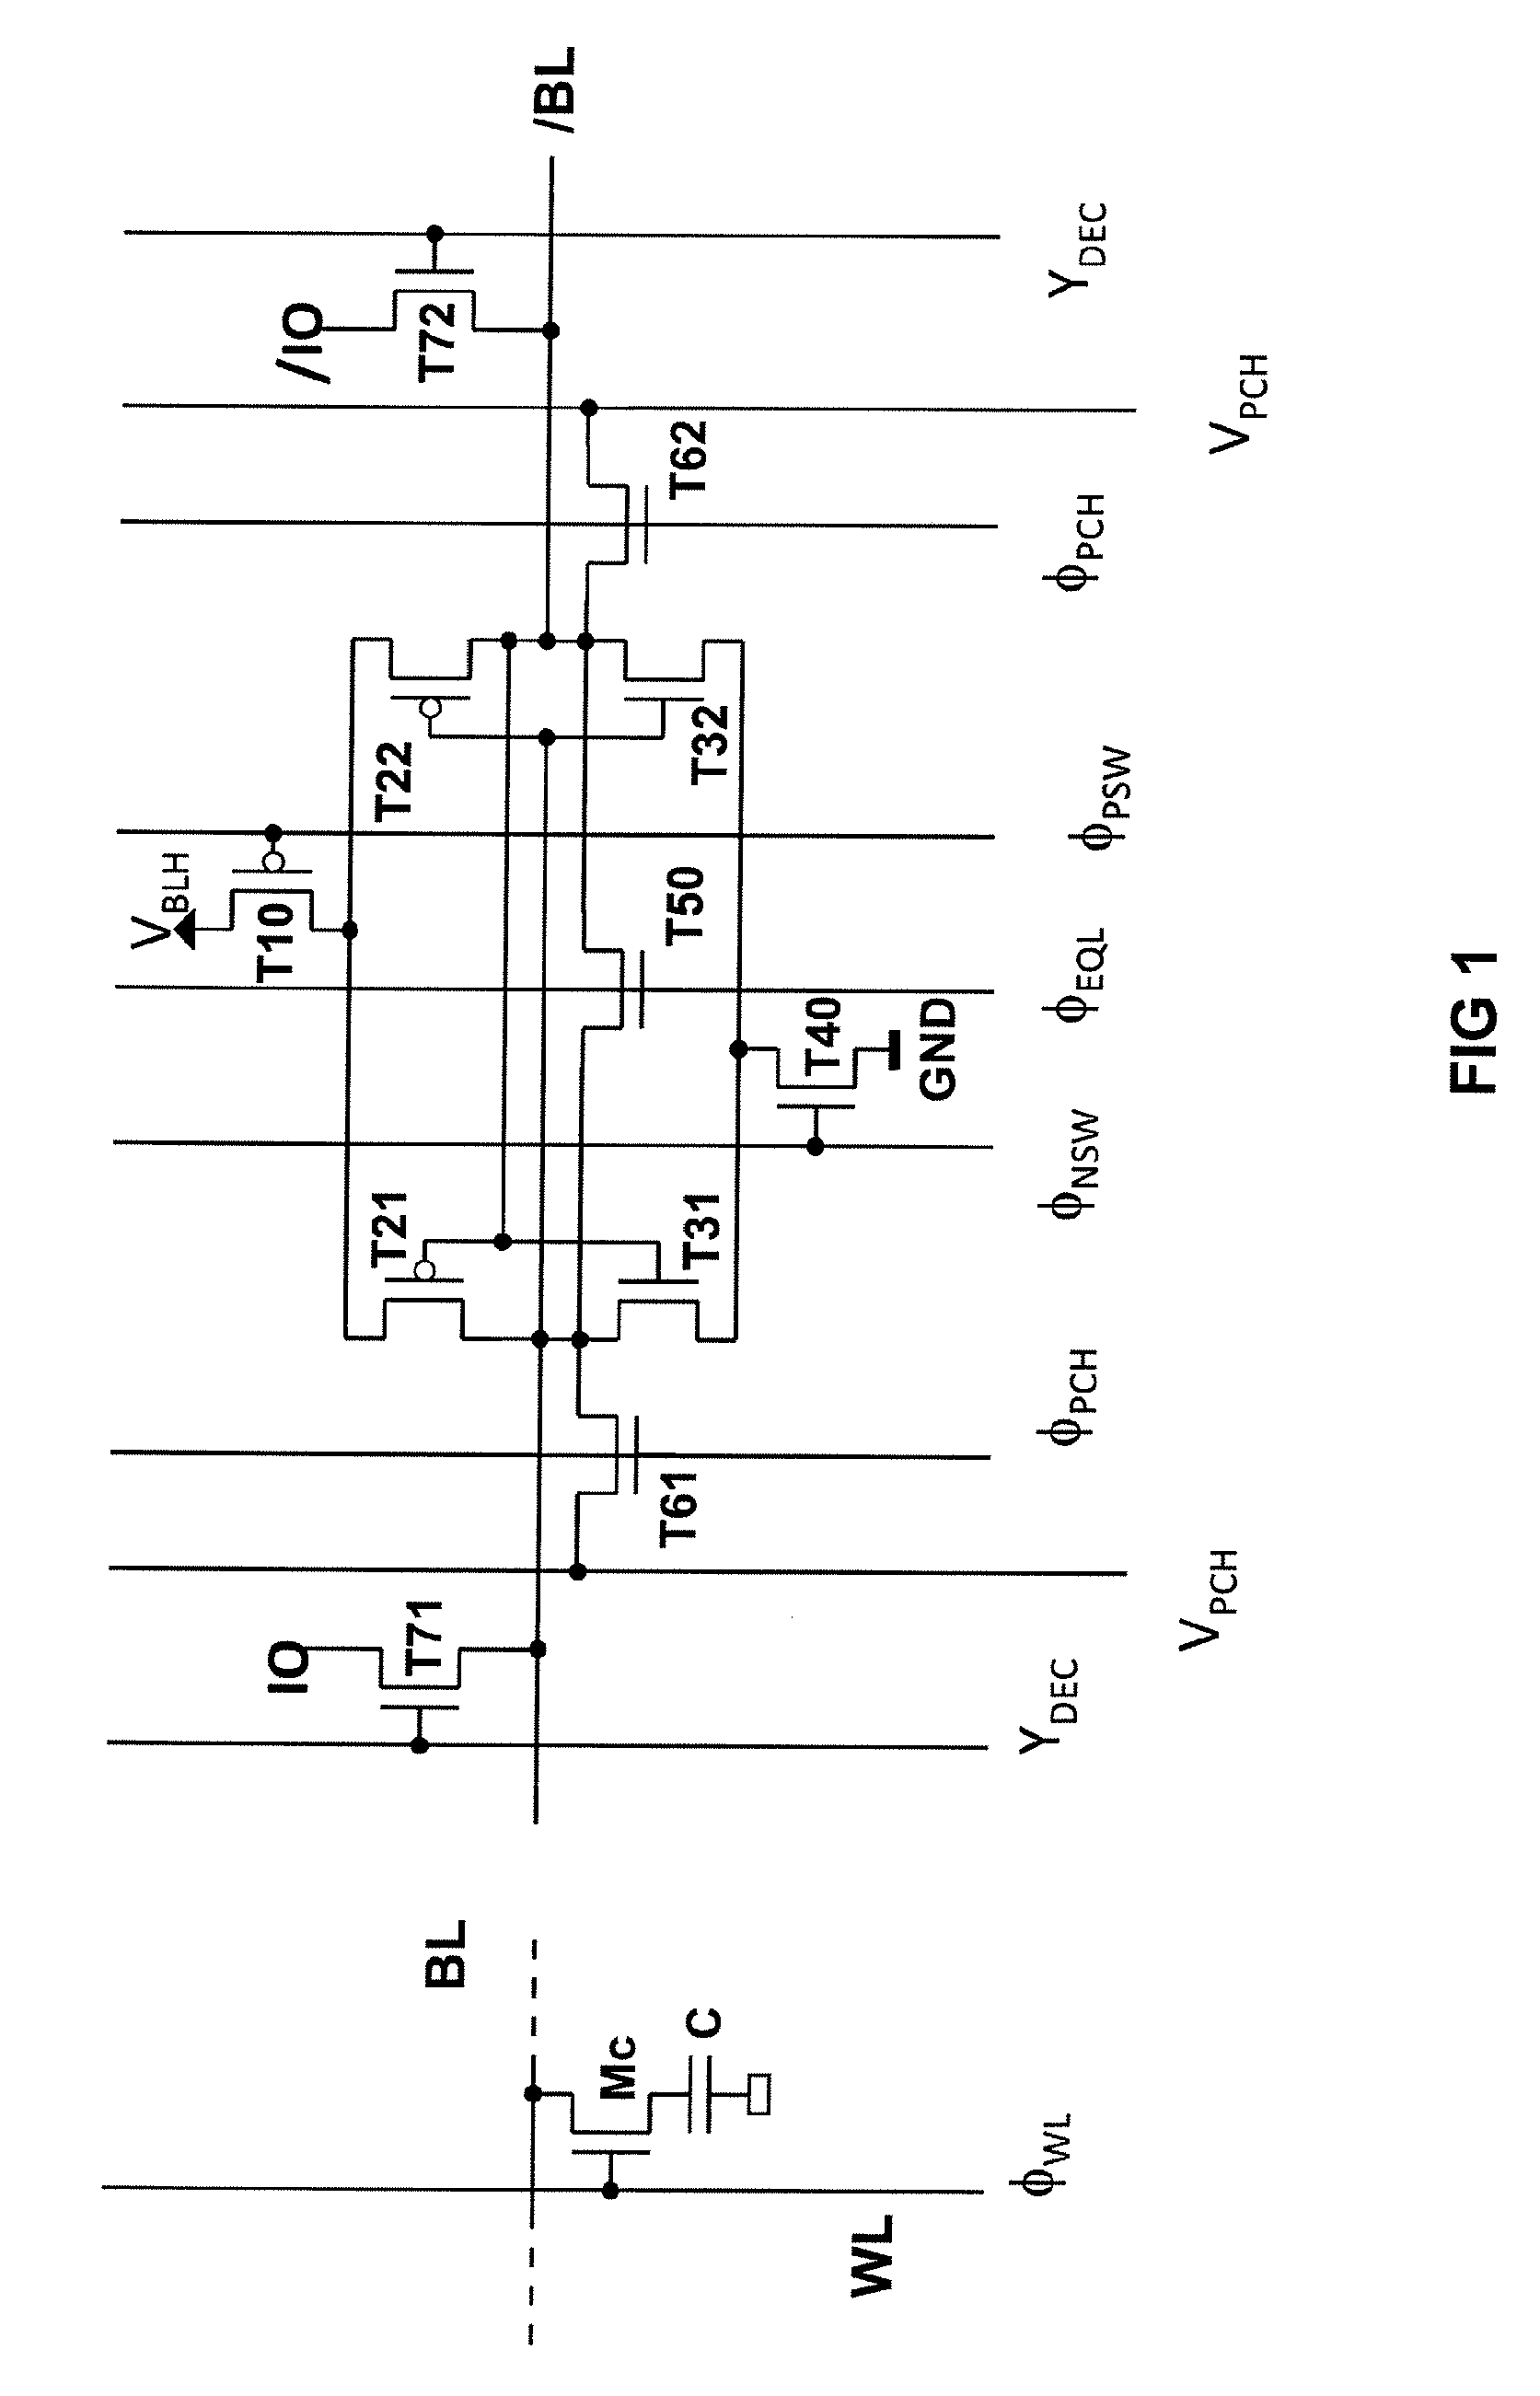 Differential sense amplifier without switch transistors